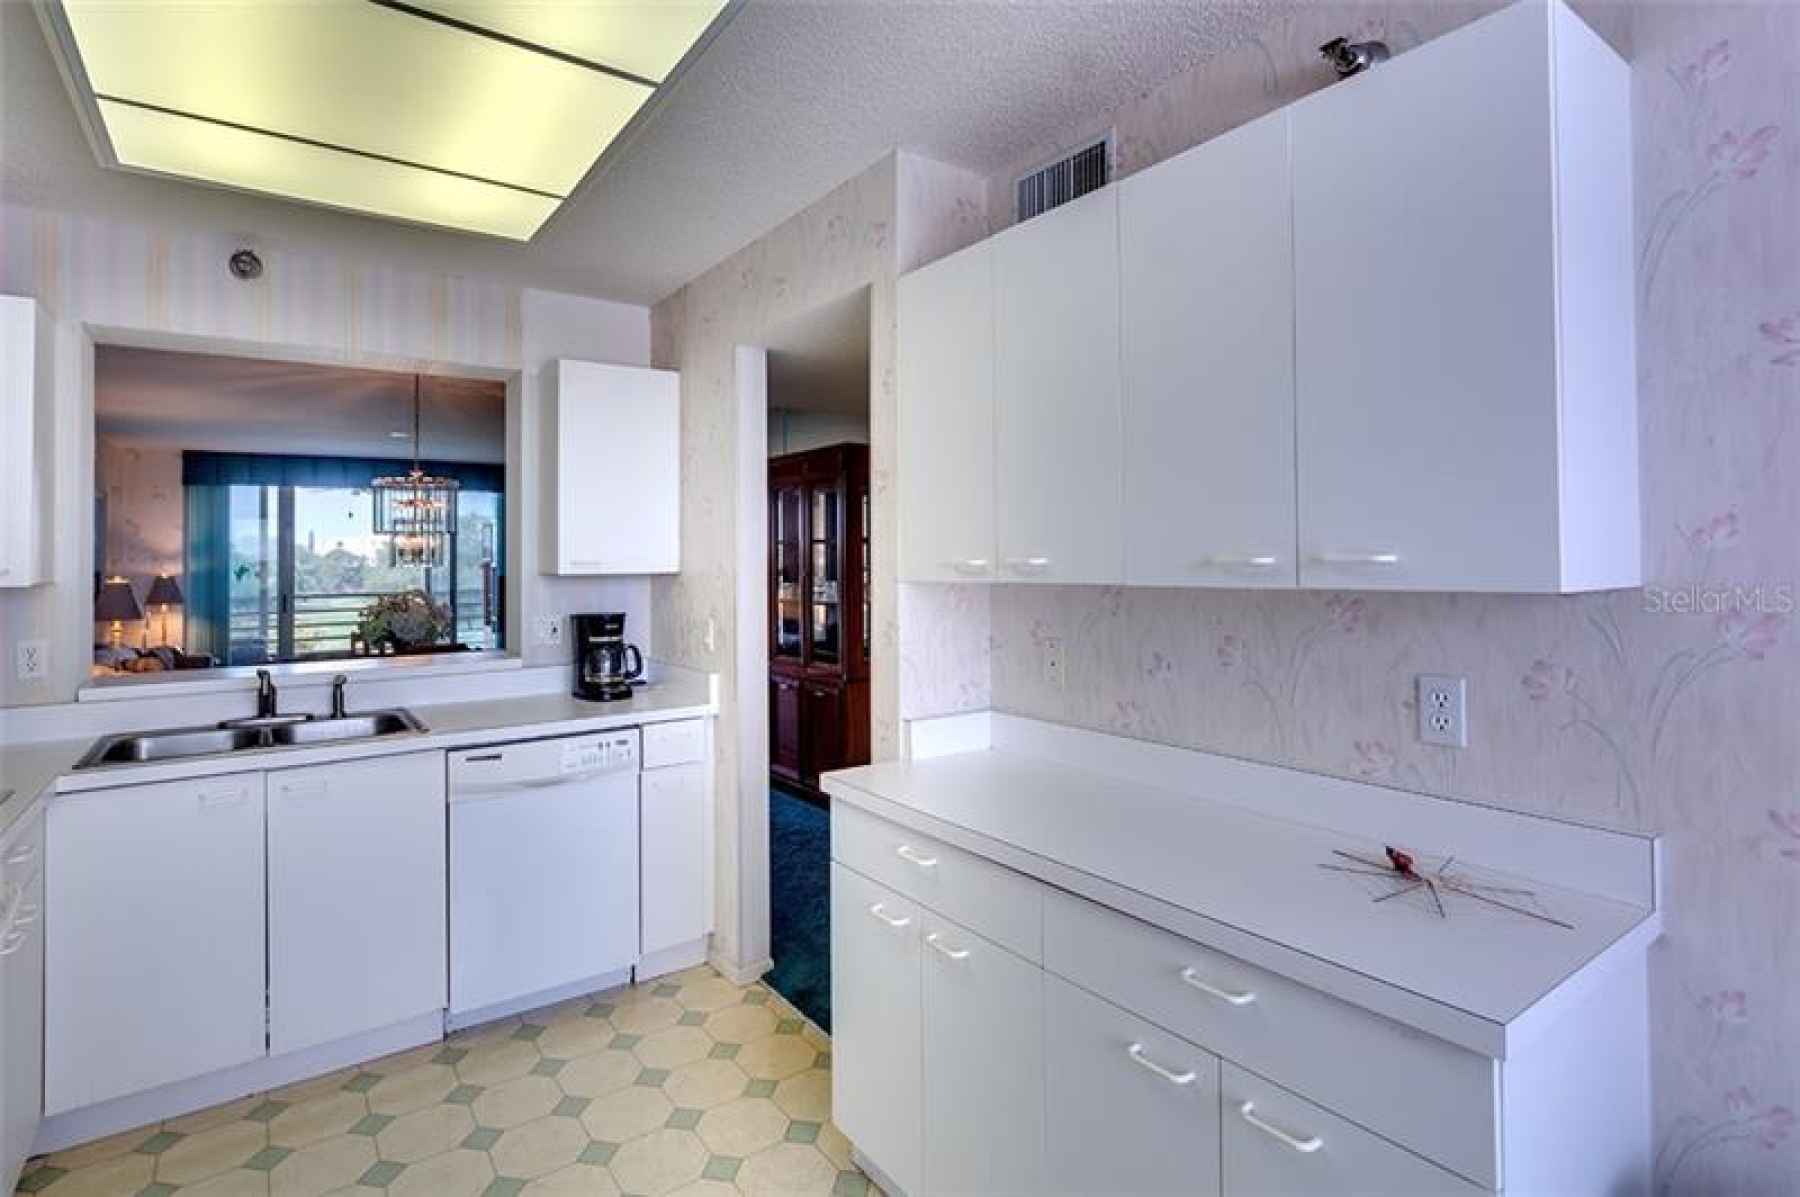 Loads of cabinets, eat in kitchen, and a buffet.